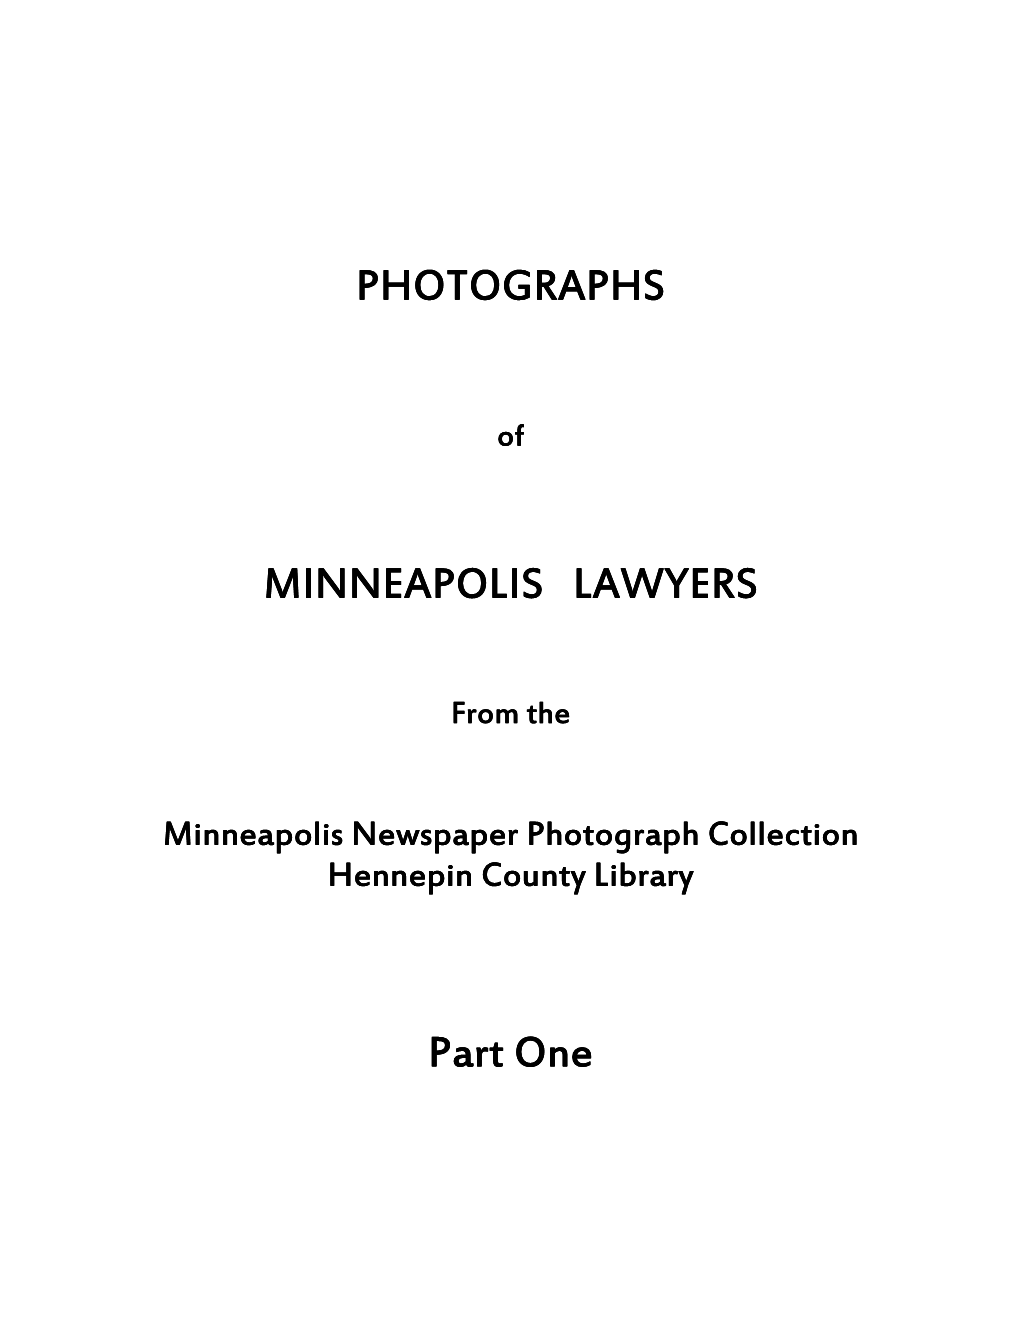 Photographs of Minneapolis Lawyers from the Minneapolis Newspaper